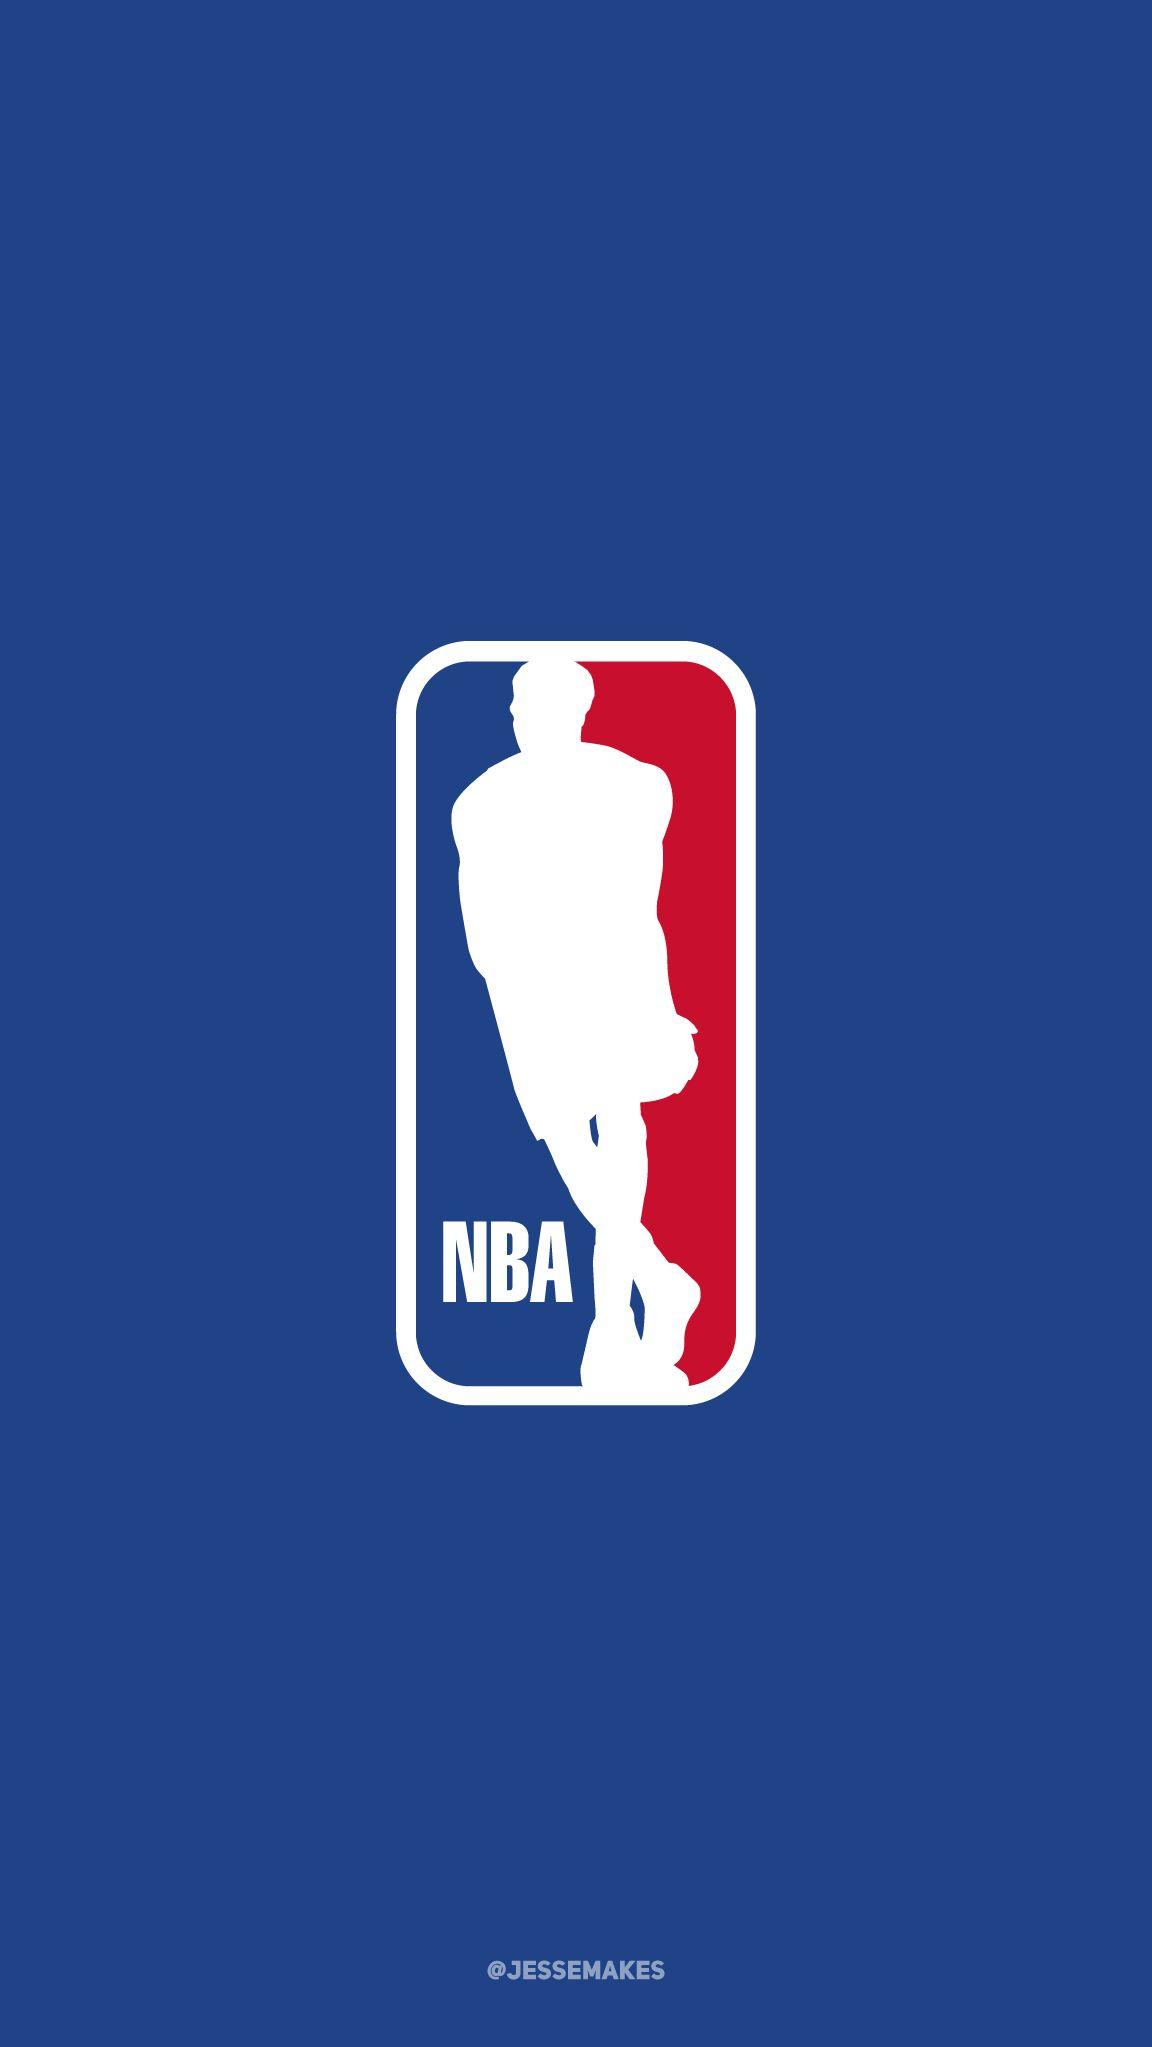 Anthony Davis as the subject of the NBA logo. Part of my NBA Logo